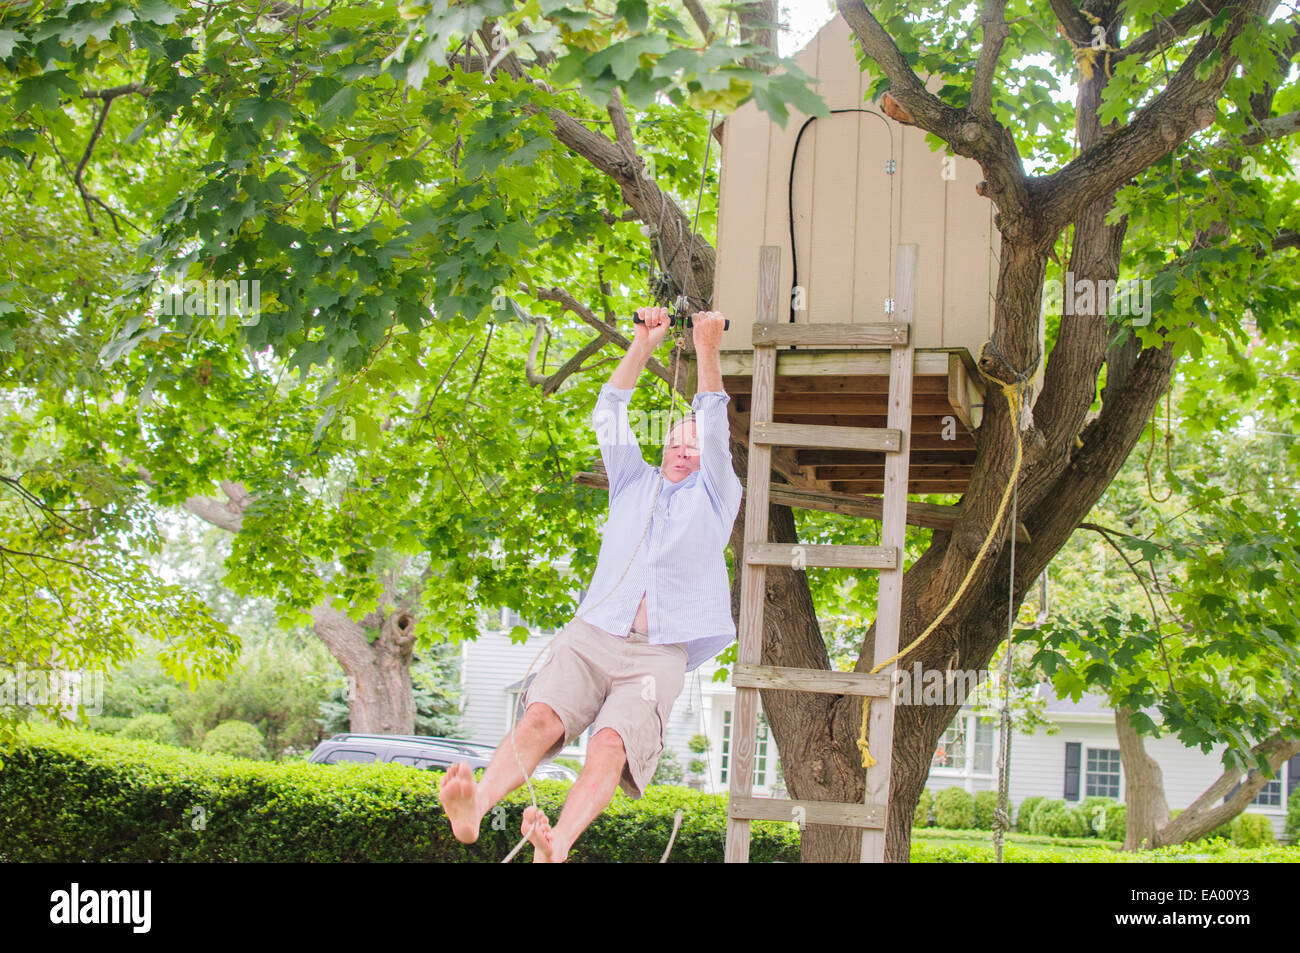 Mature man sliding down on pulley from tree house Stock Photo